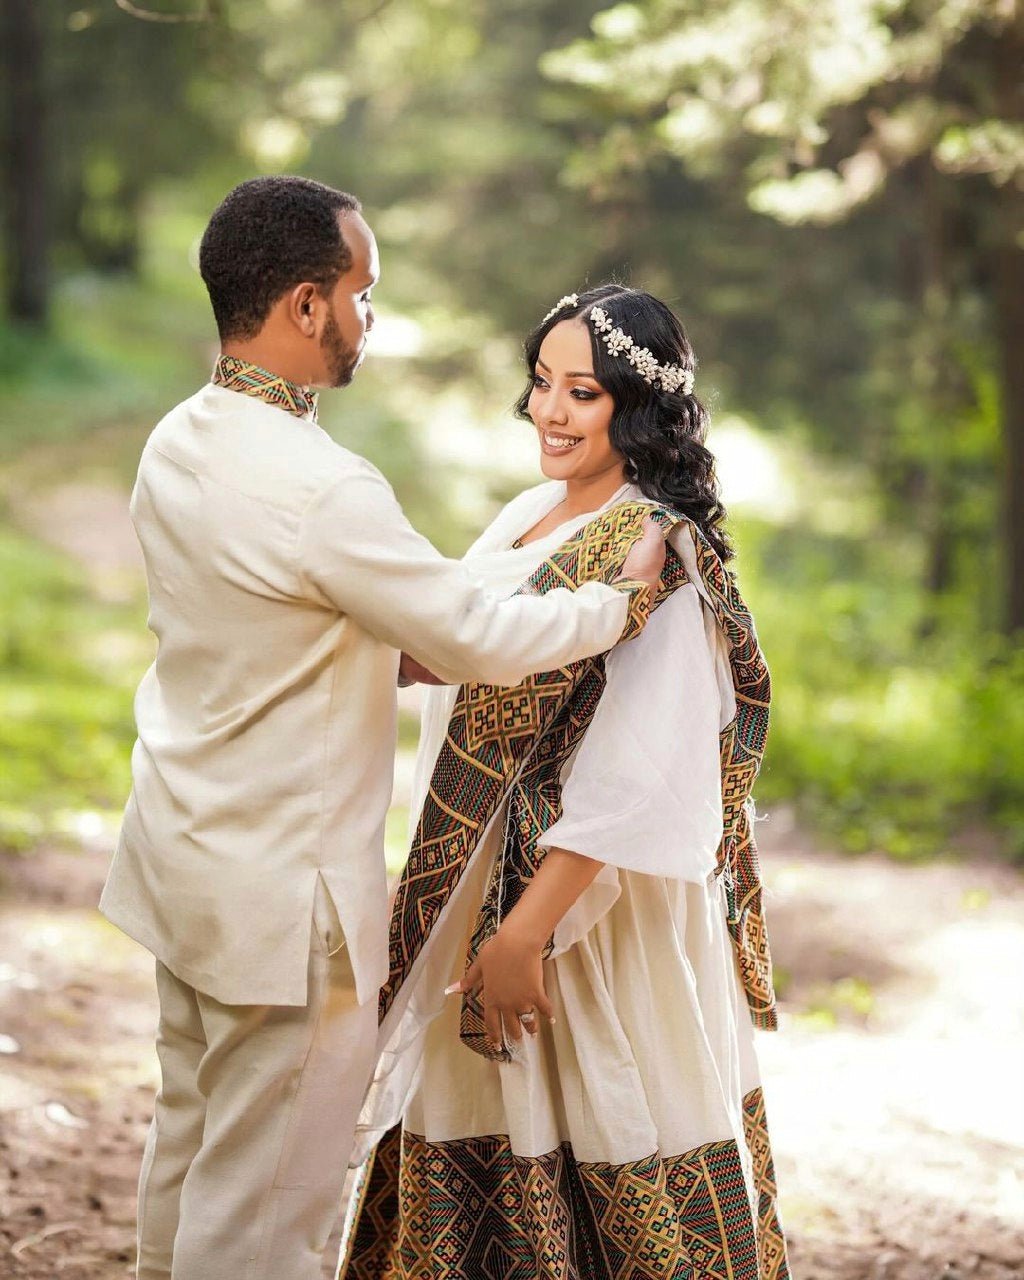 Artistry Unveiled: Handwoven Elegance in Habesha Couples' Outfit